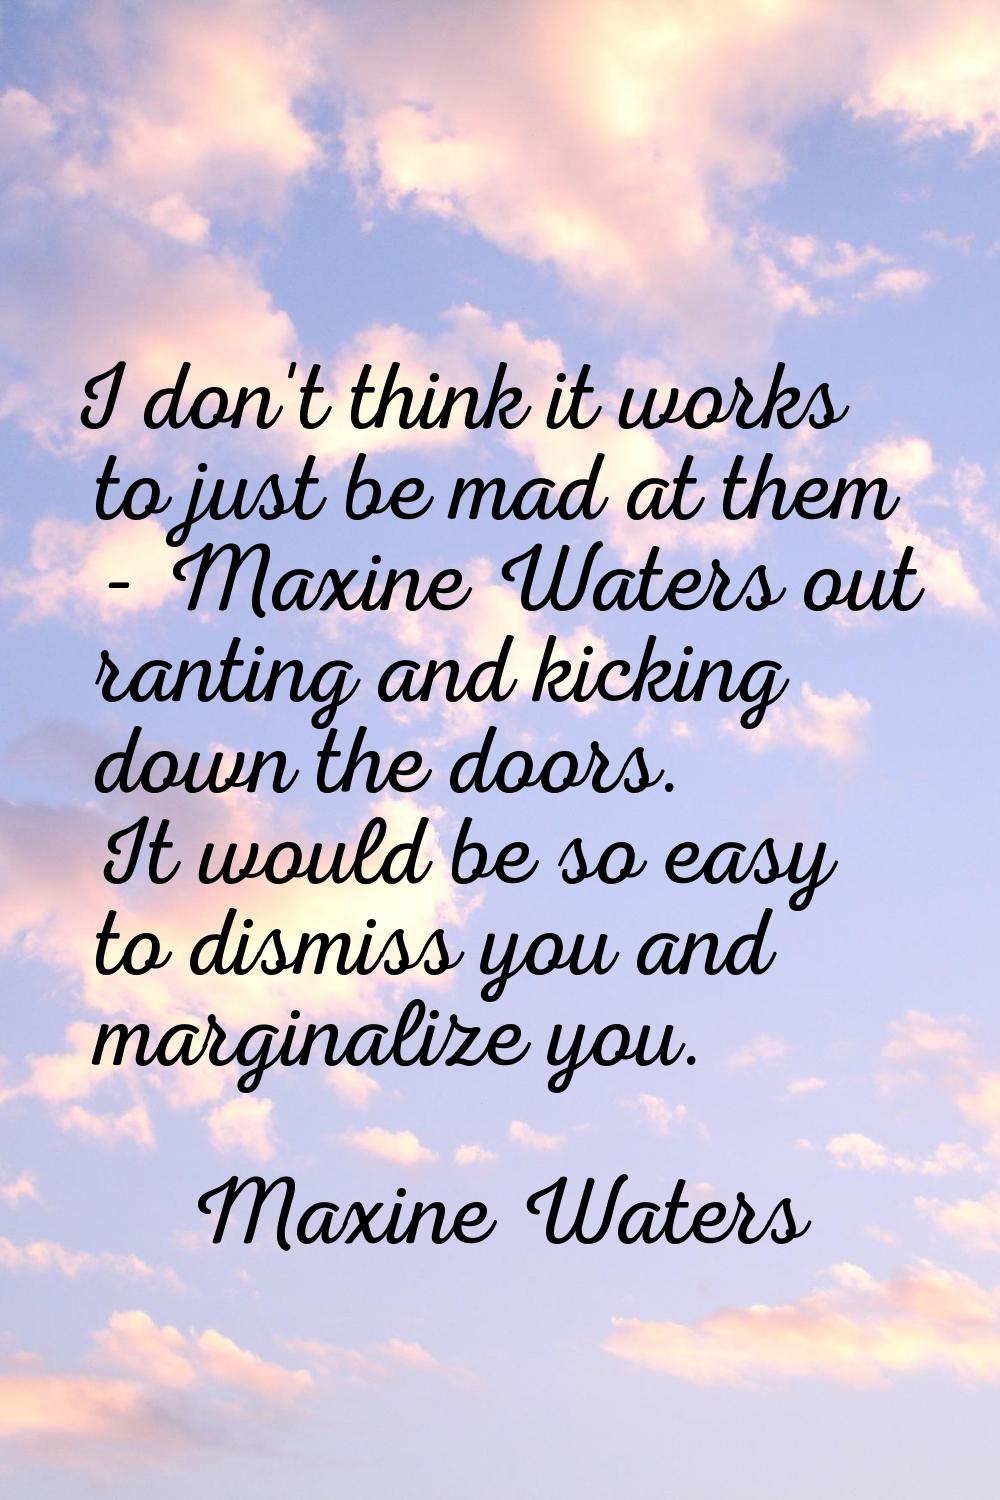 I don't think it works to just be mad at them - Maxine Waters out ranting and kicking down the door